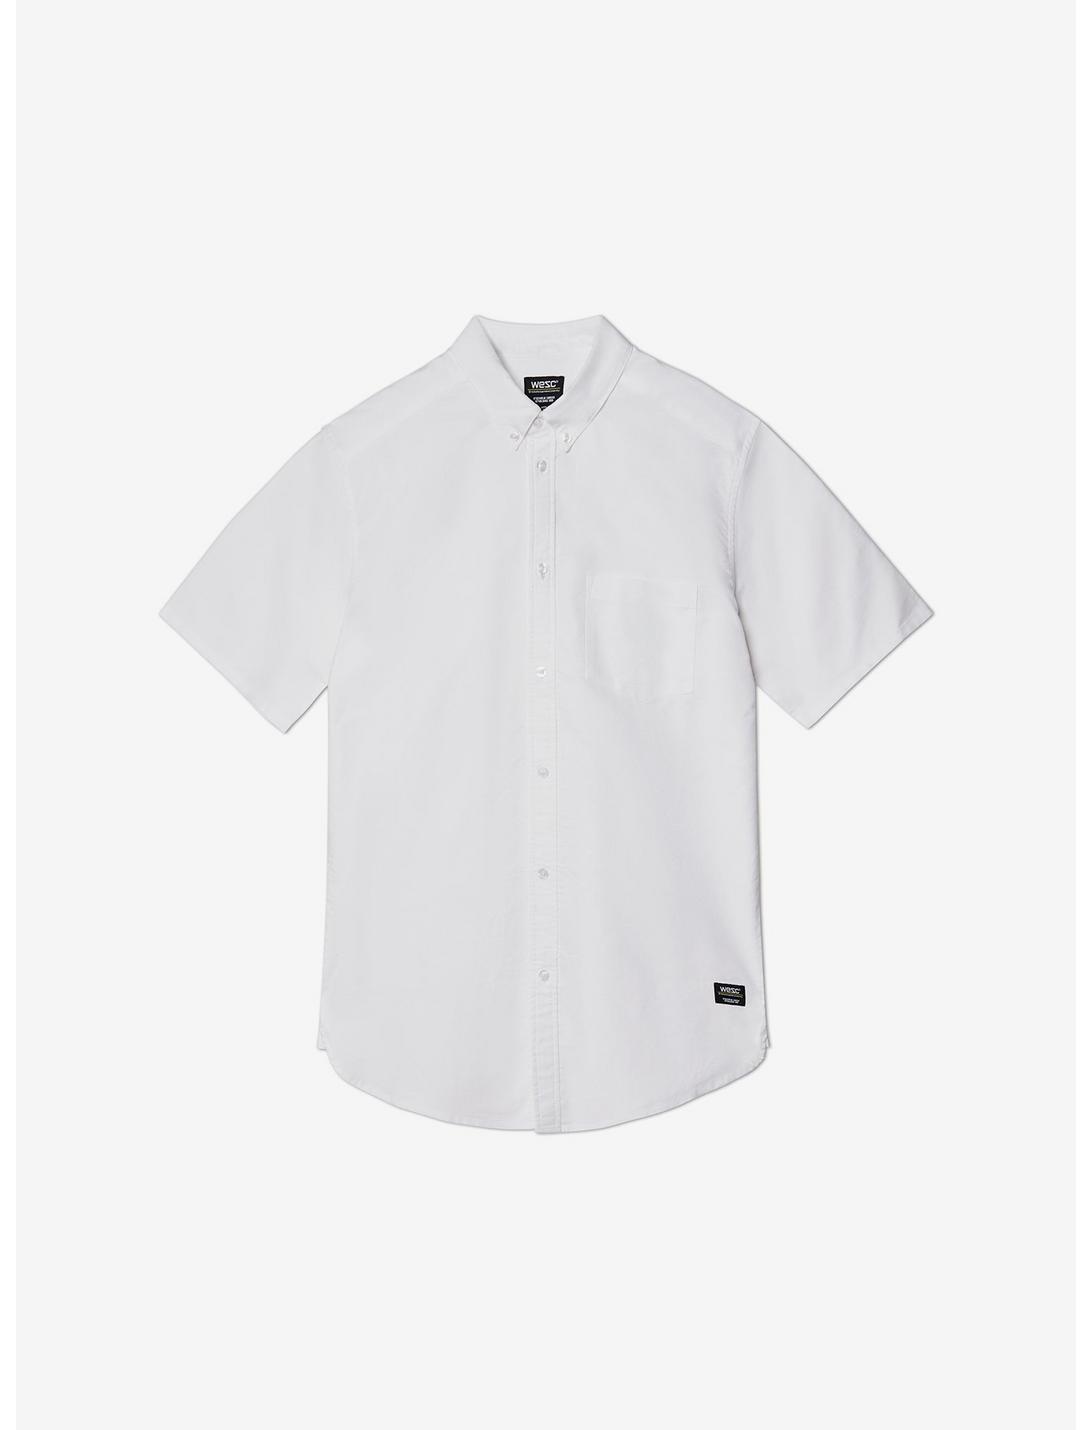 WeSC Oden Oxford Short Sleeve Button-Up Shirt White, BRIGHT WHITE, hi-res